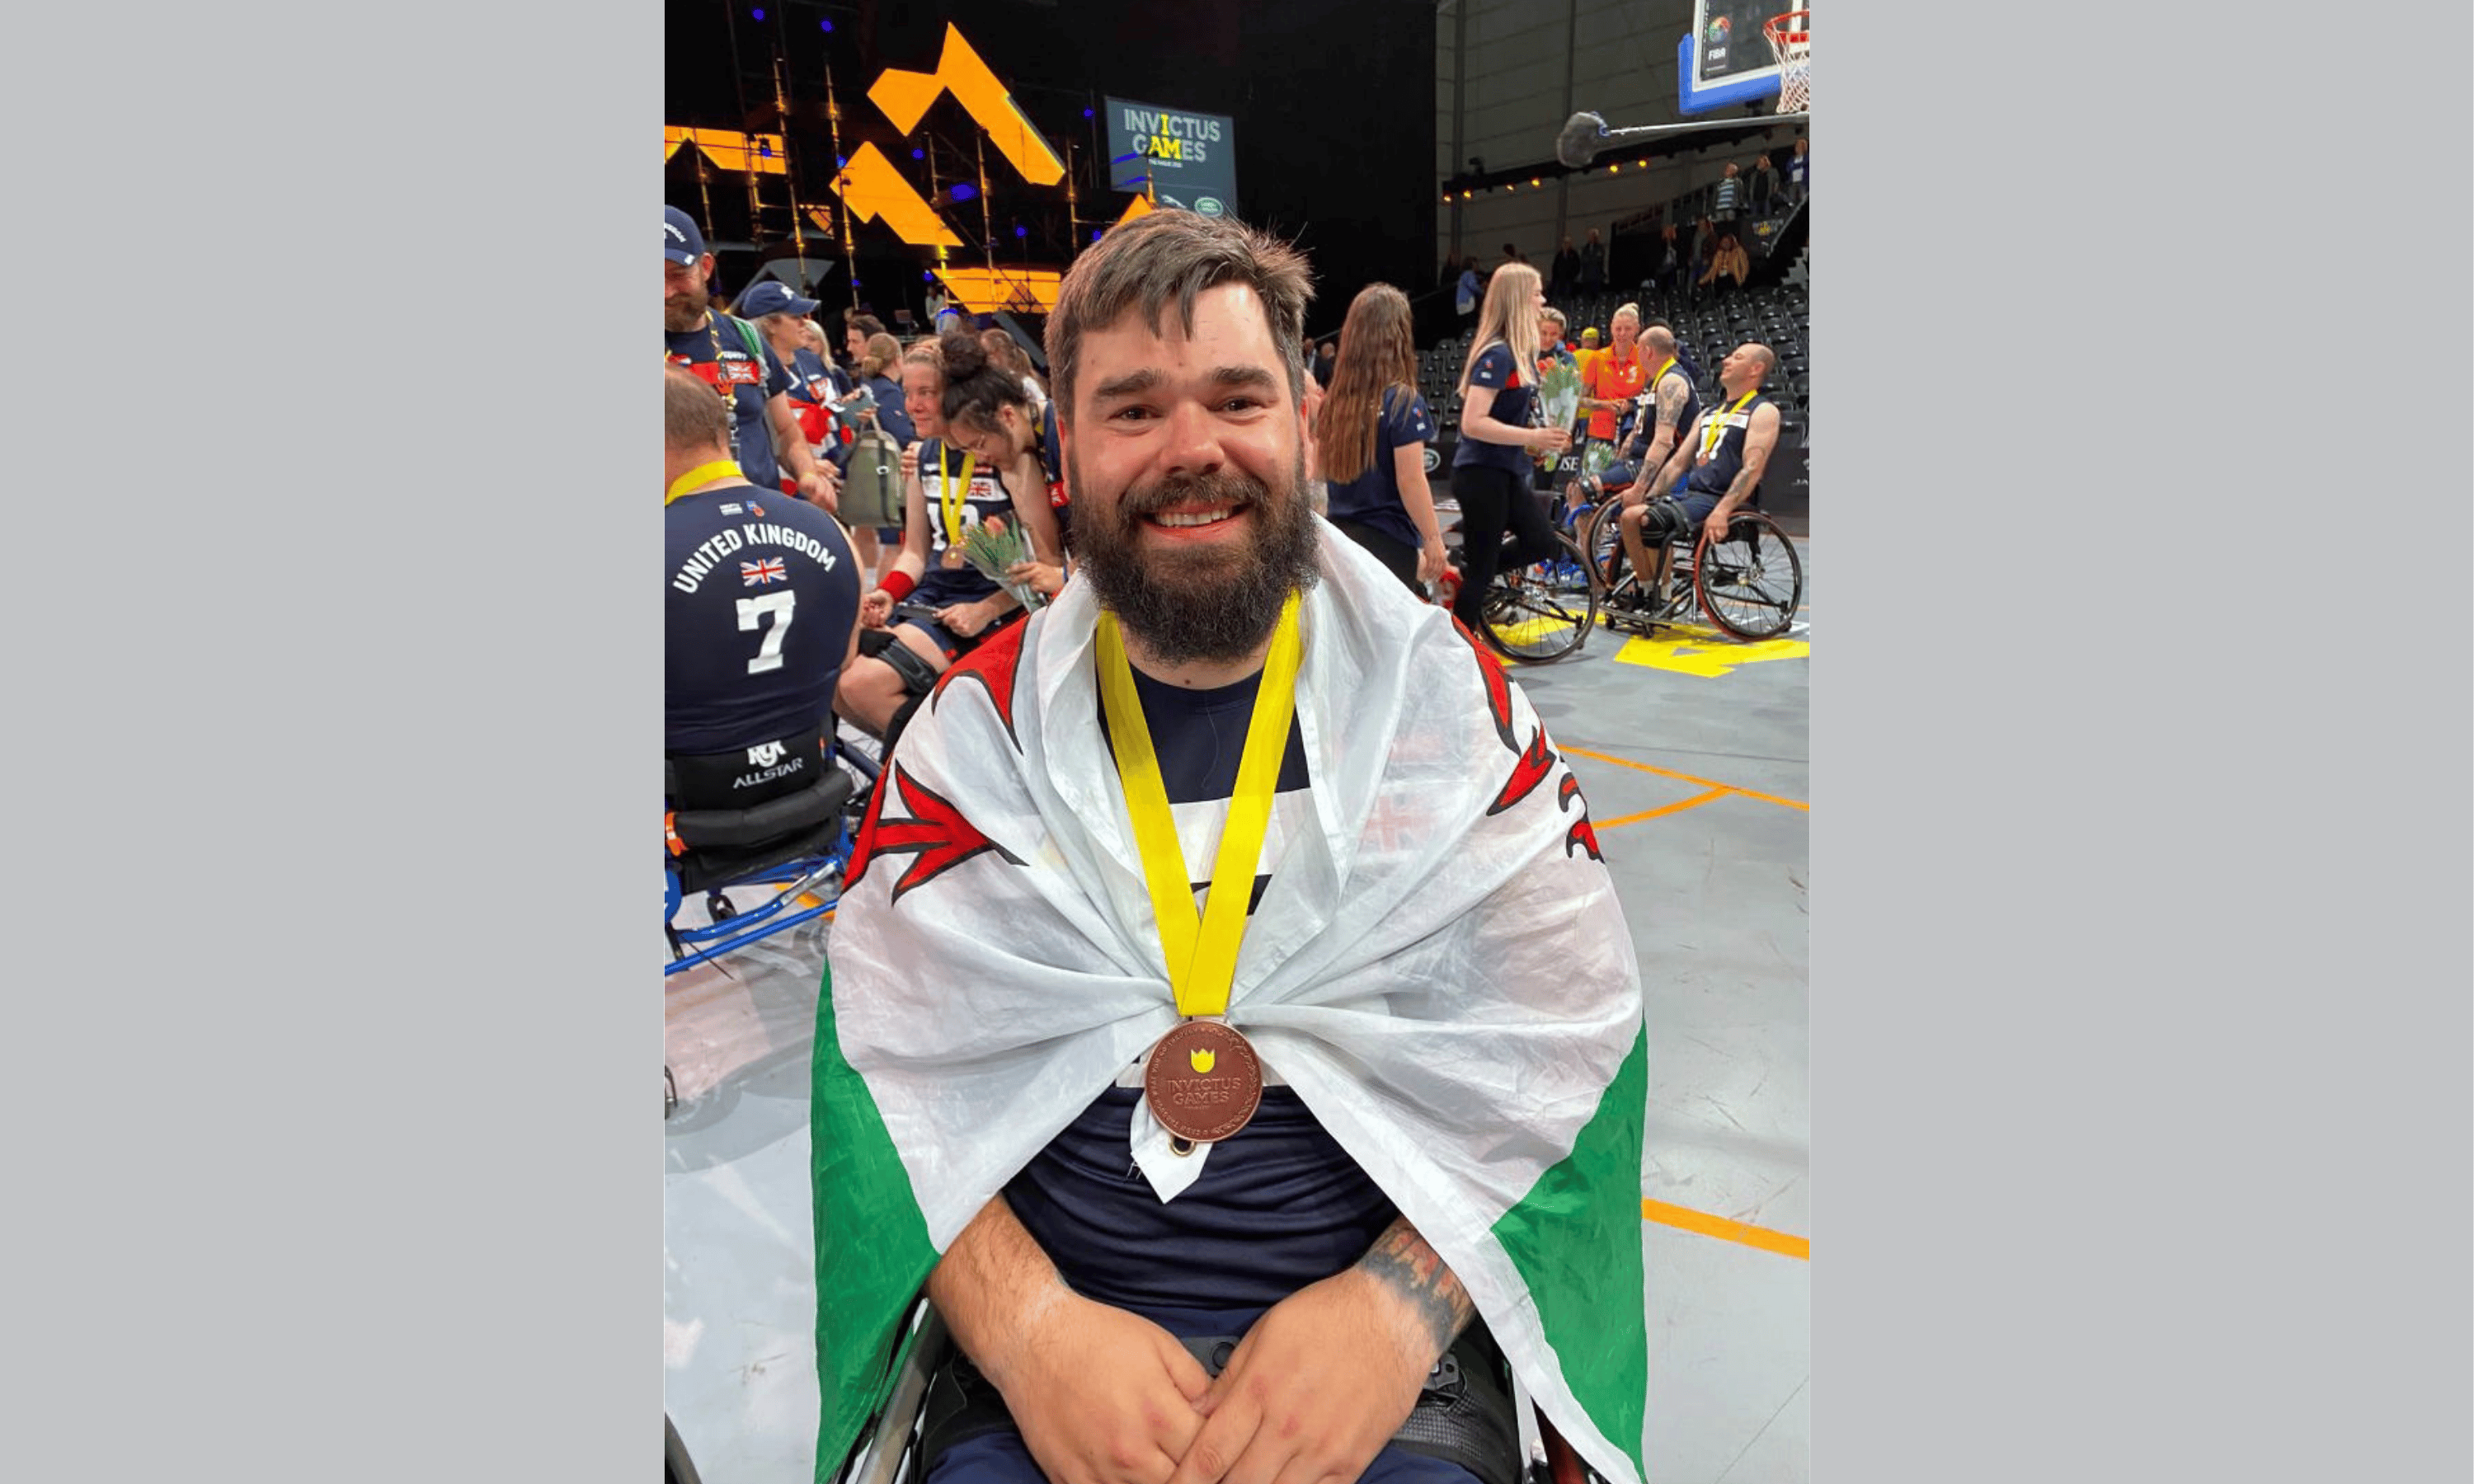 Brecon Invictus Games medalist tells his incredible story